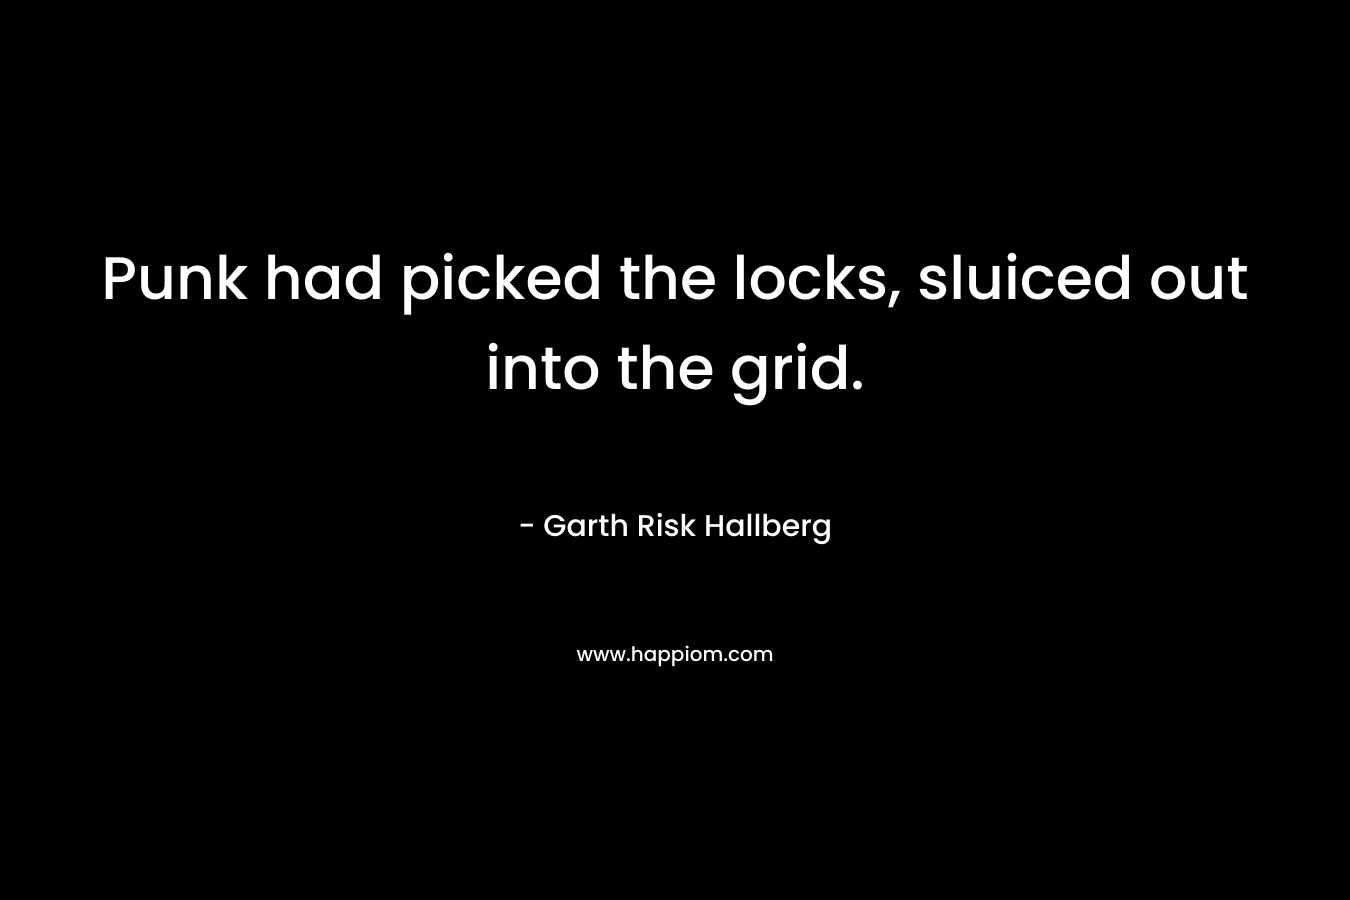 Punk had picked the locks, sluiced out into the grid. – Garth Risk Hallberg